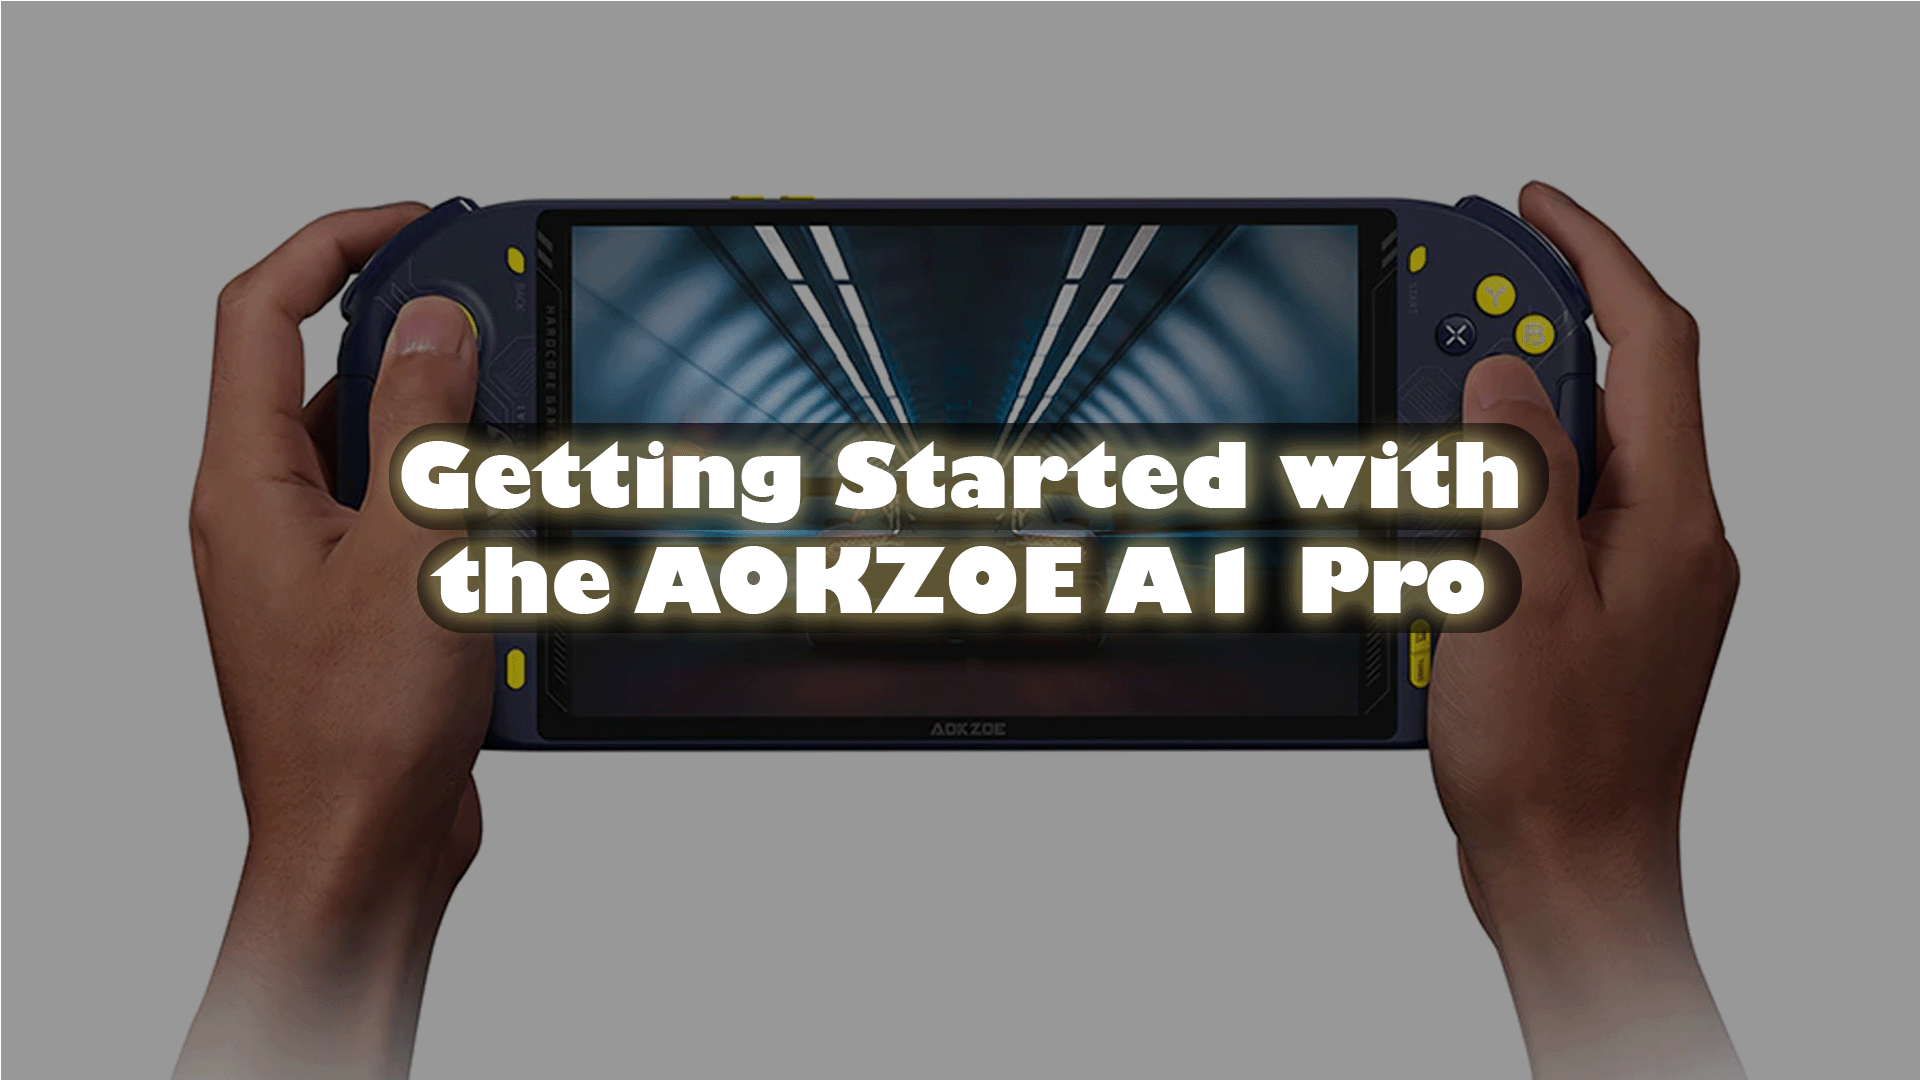 Getting Started With the AOKZOE A1 Pro